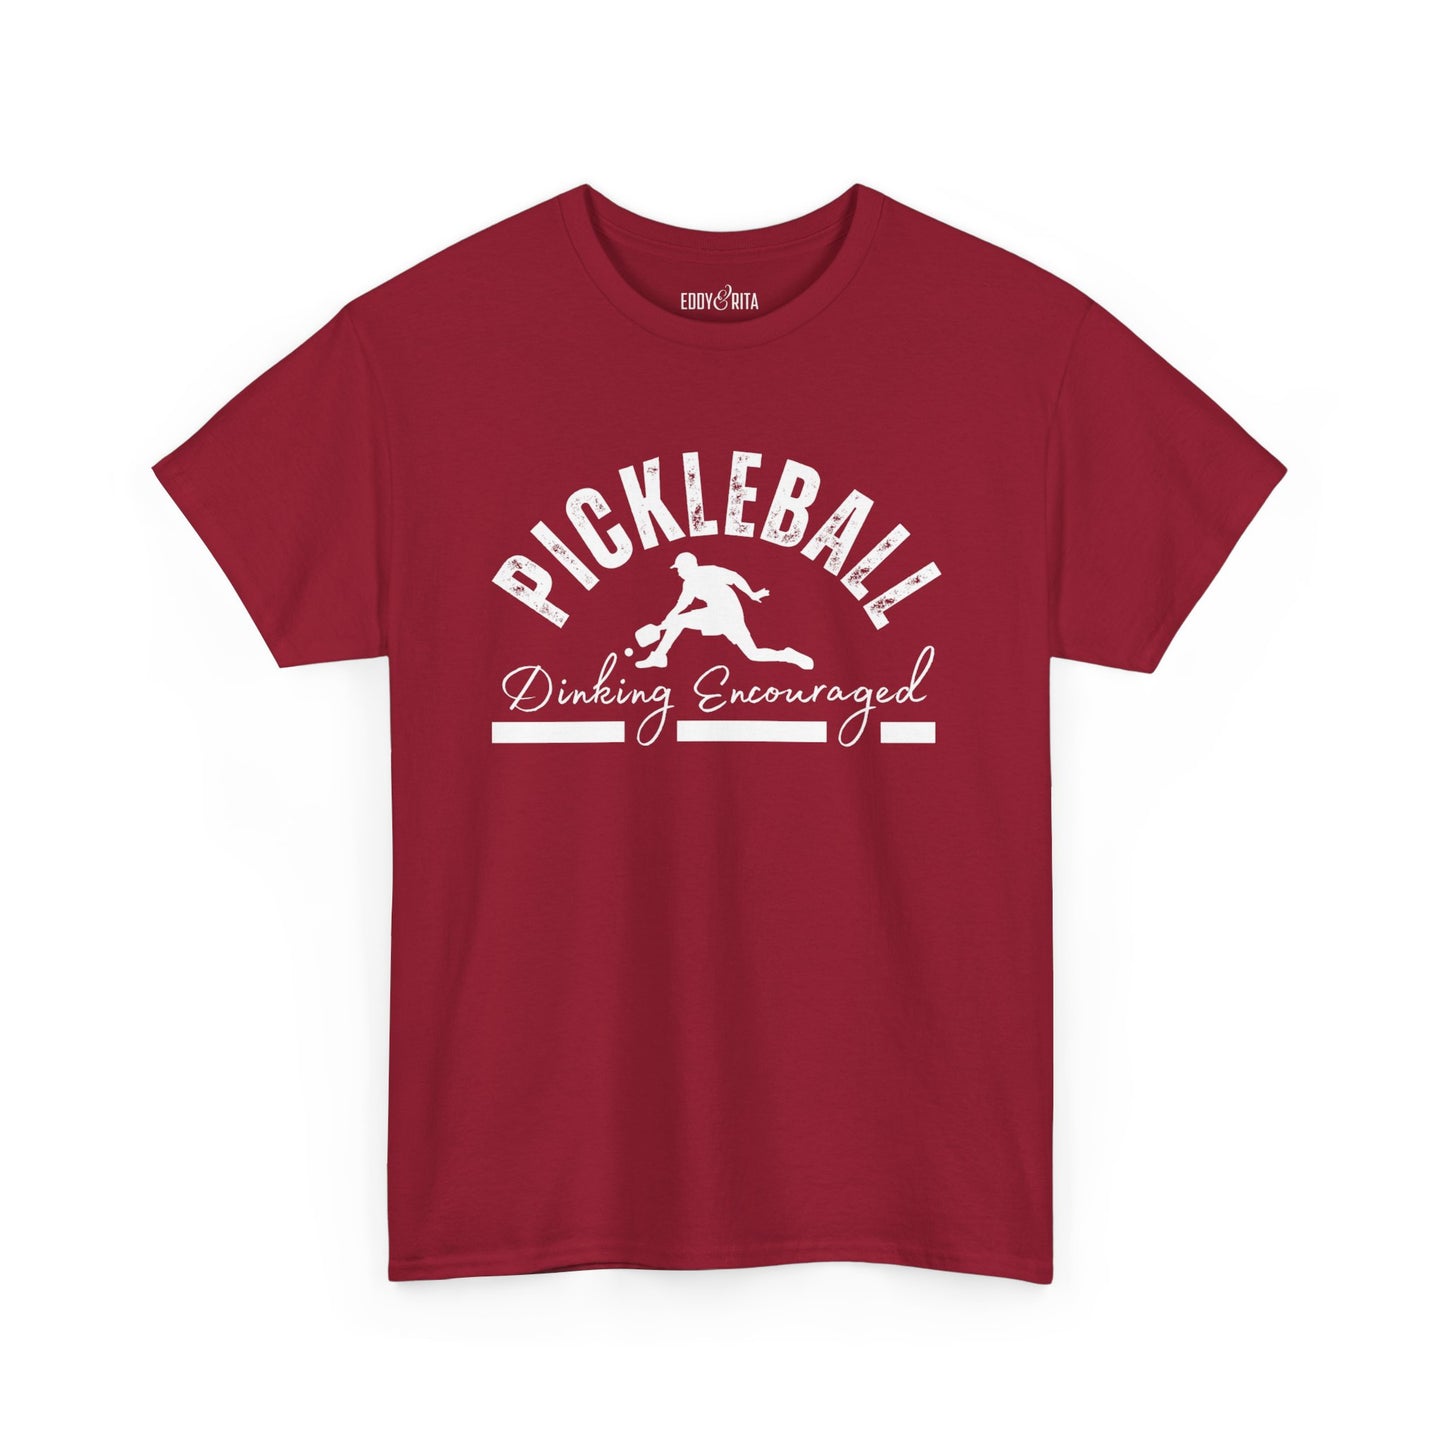 Eddy and Rita Men's Heavy Cotton T-Shirt - "Pickleball Dinking Encouraged" Graphic Tee for Pickleball Enthusiasts